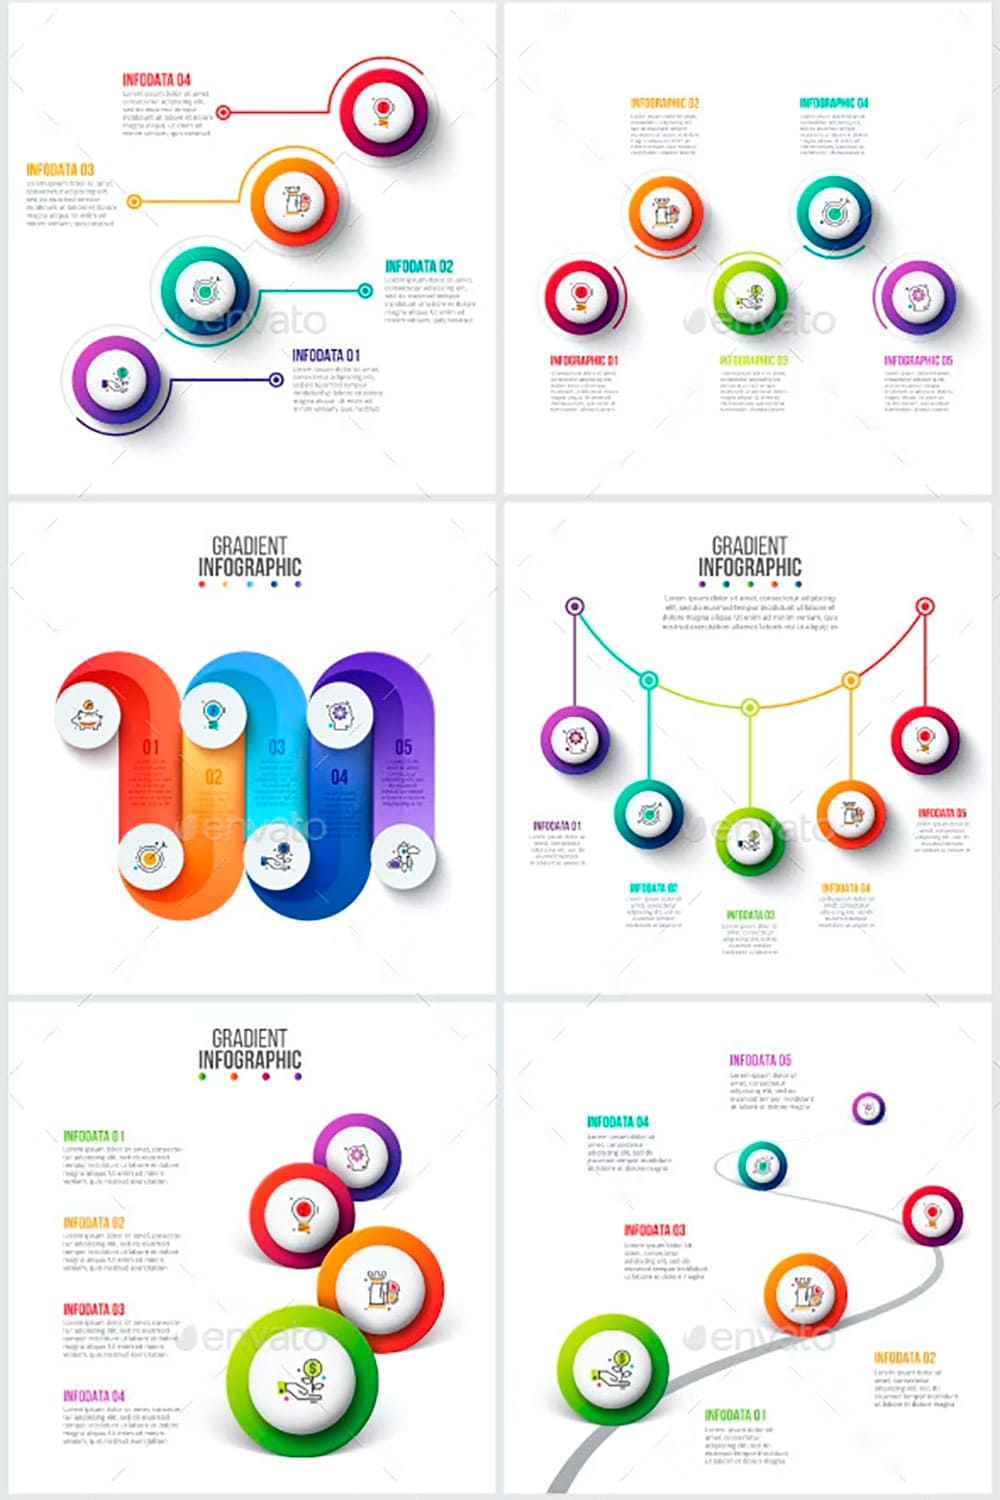 Gradient infographic pack 791, picture for pinterest.